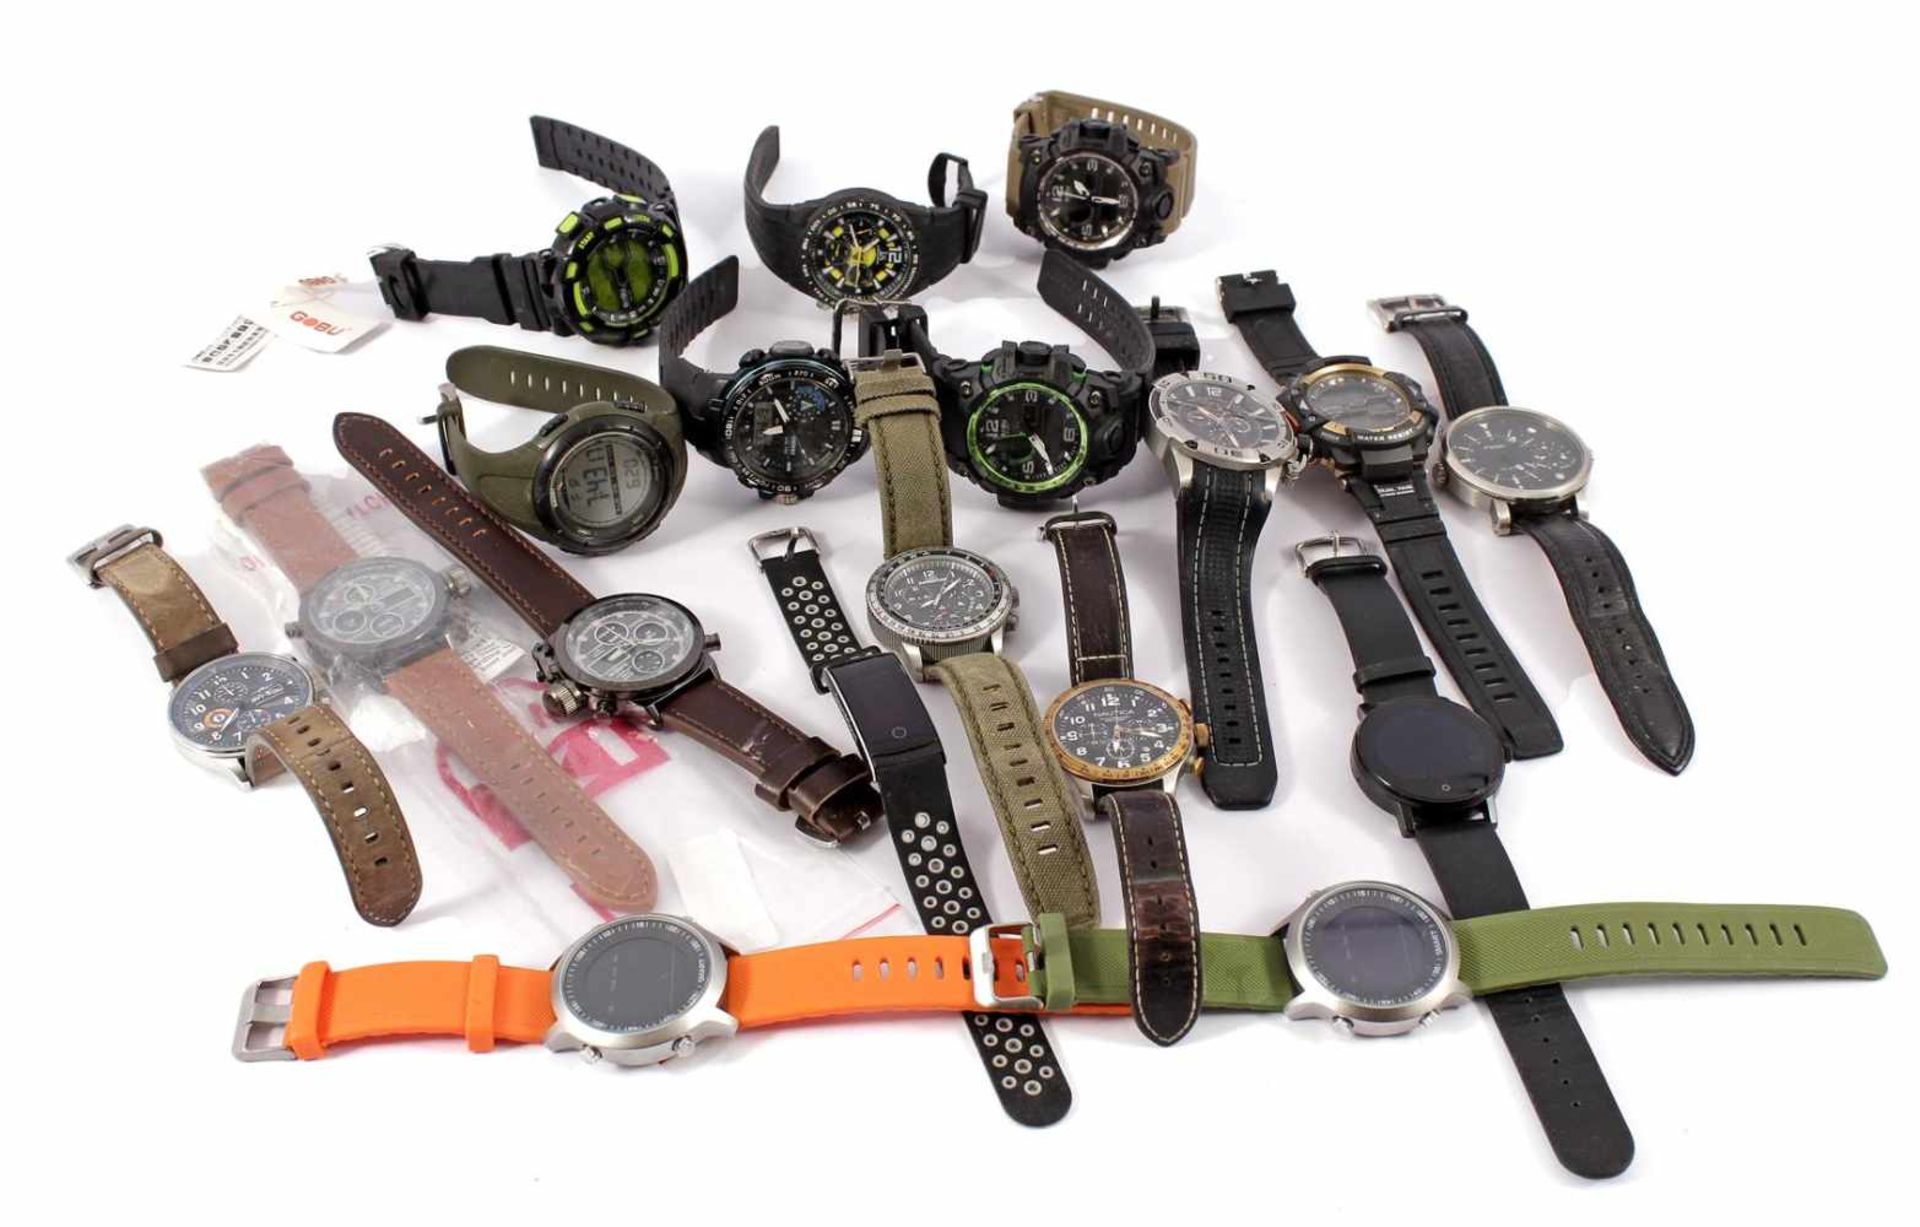 17 & nbsp; various men's watches including Fosil, Avi-8, ISW, Gobu, Nautica, Timex and Xinew